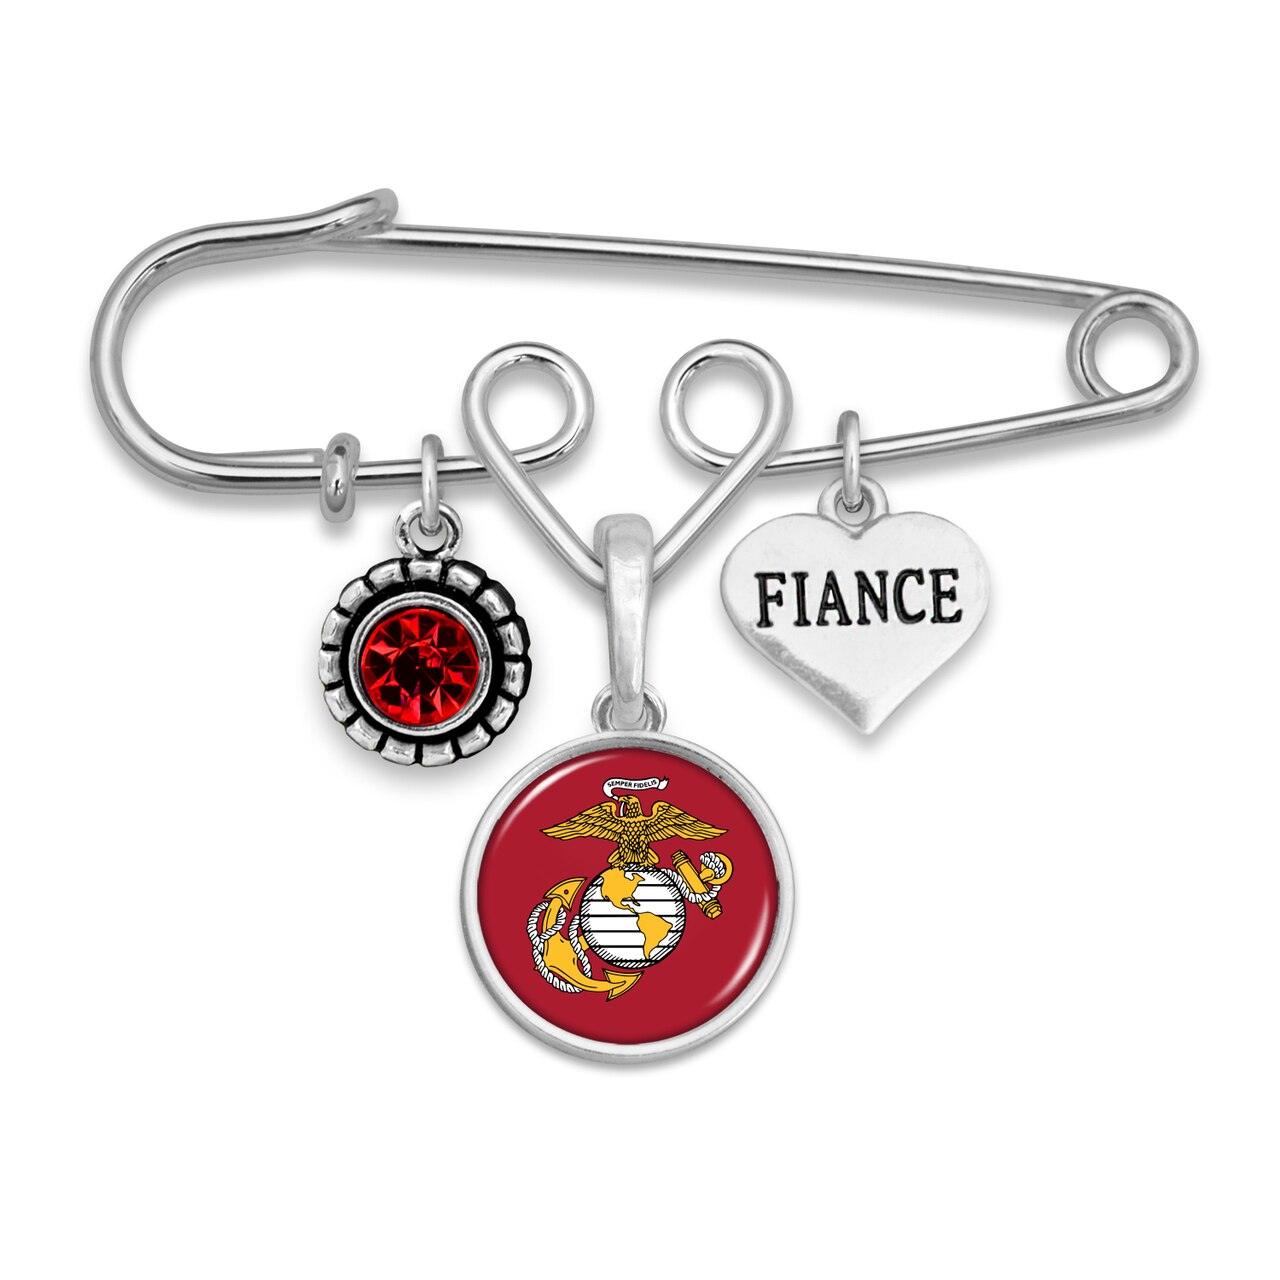 U.S. Marines Triple Charm Brooch with Fiance Accent Charm - Military Republic